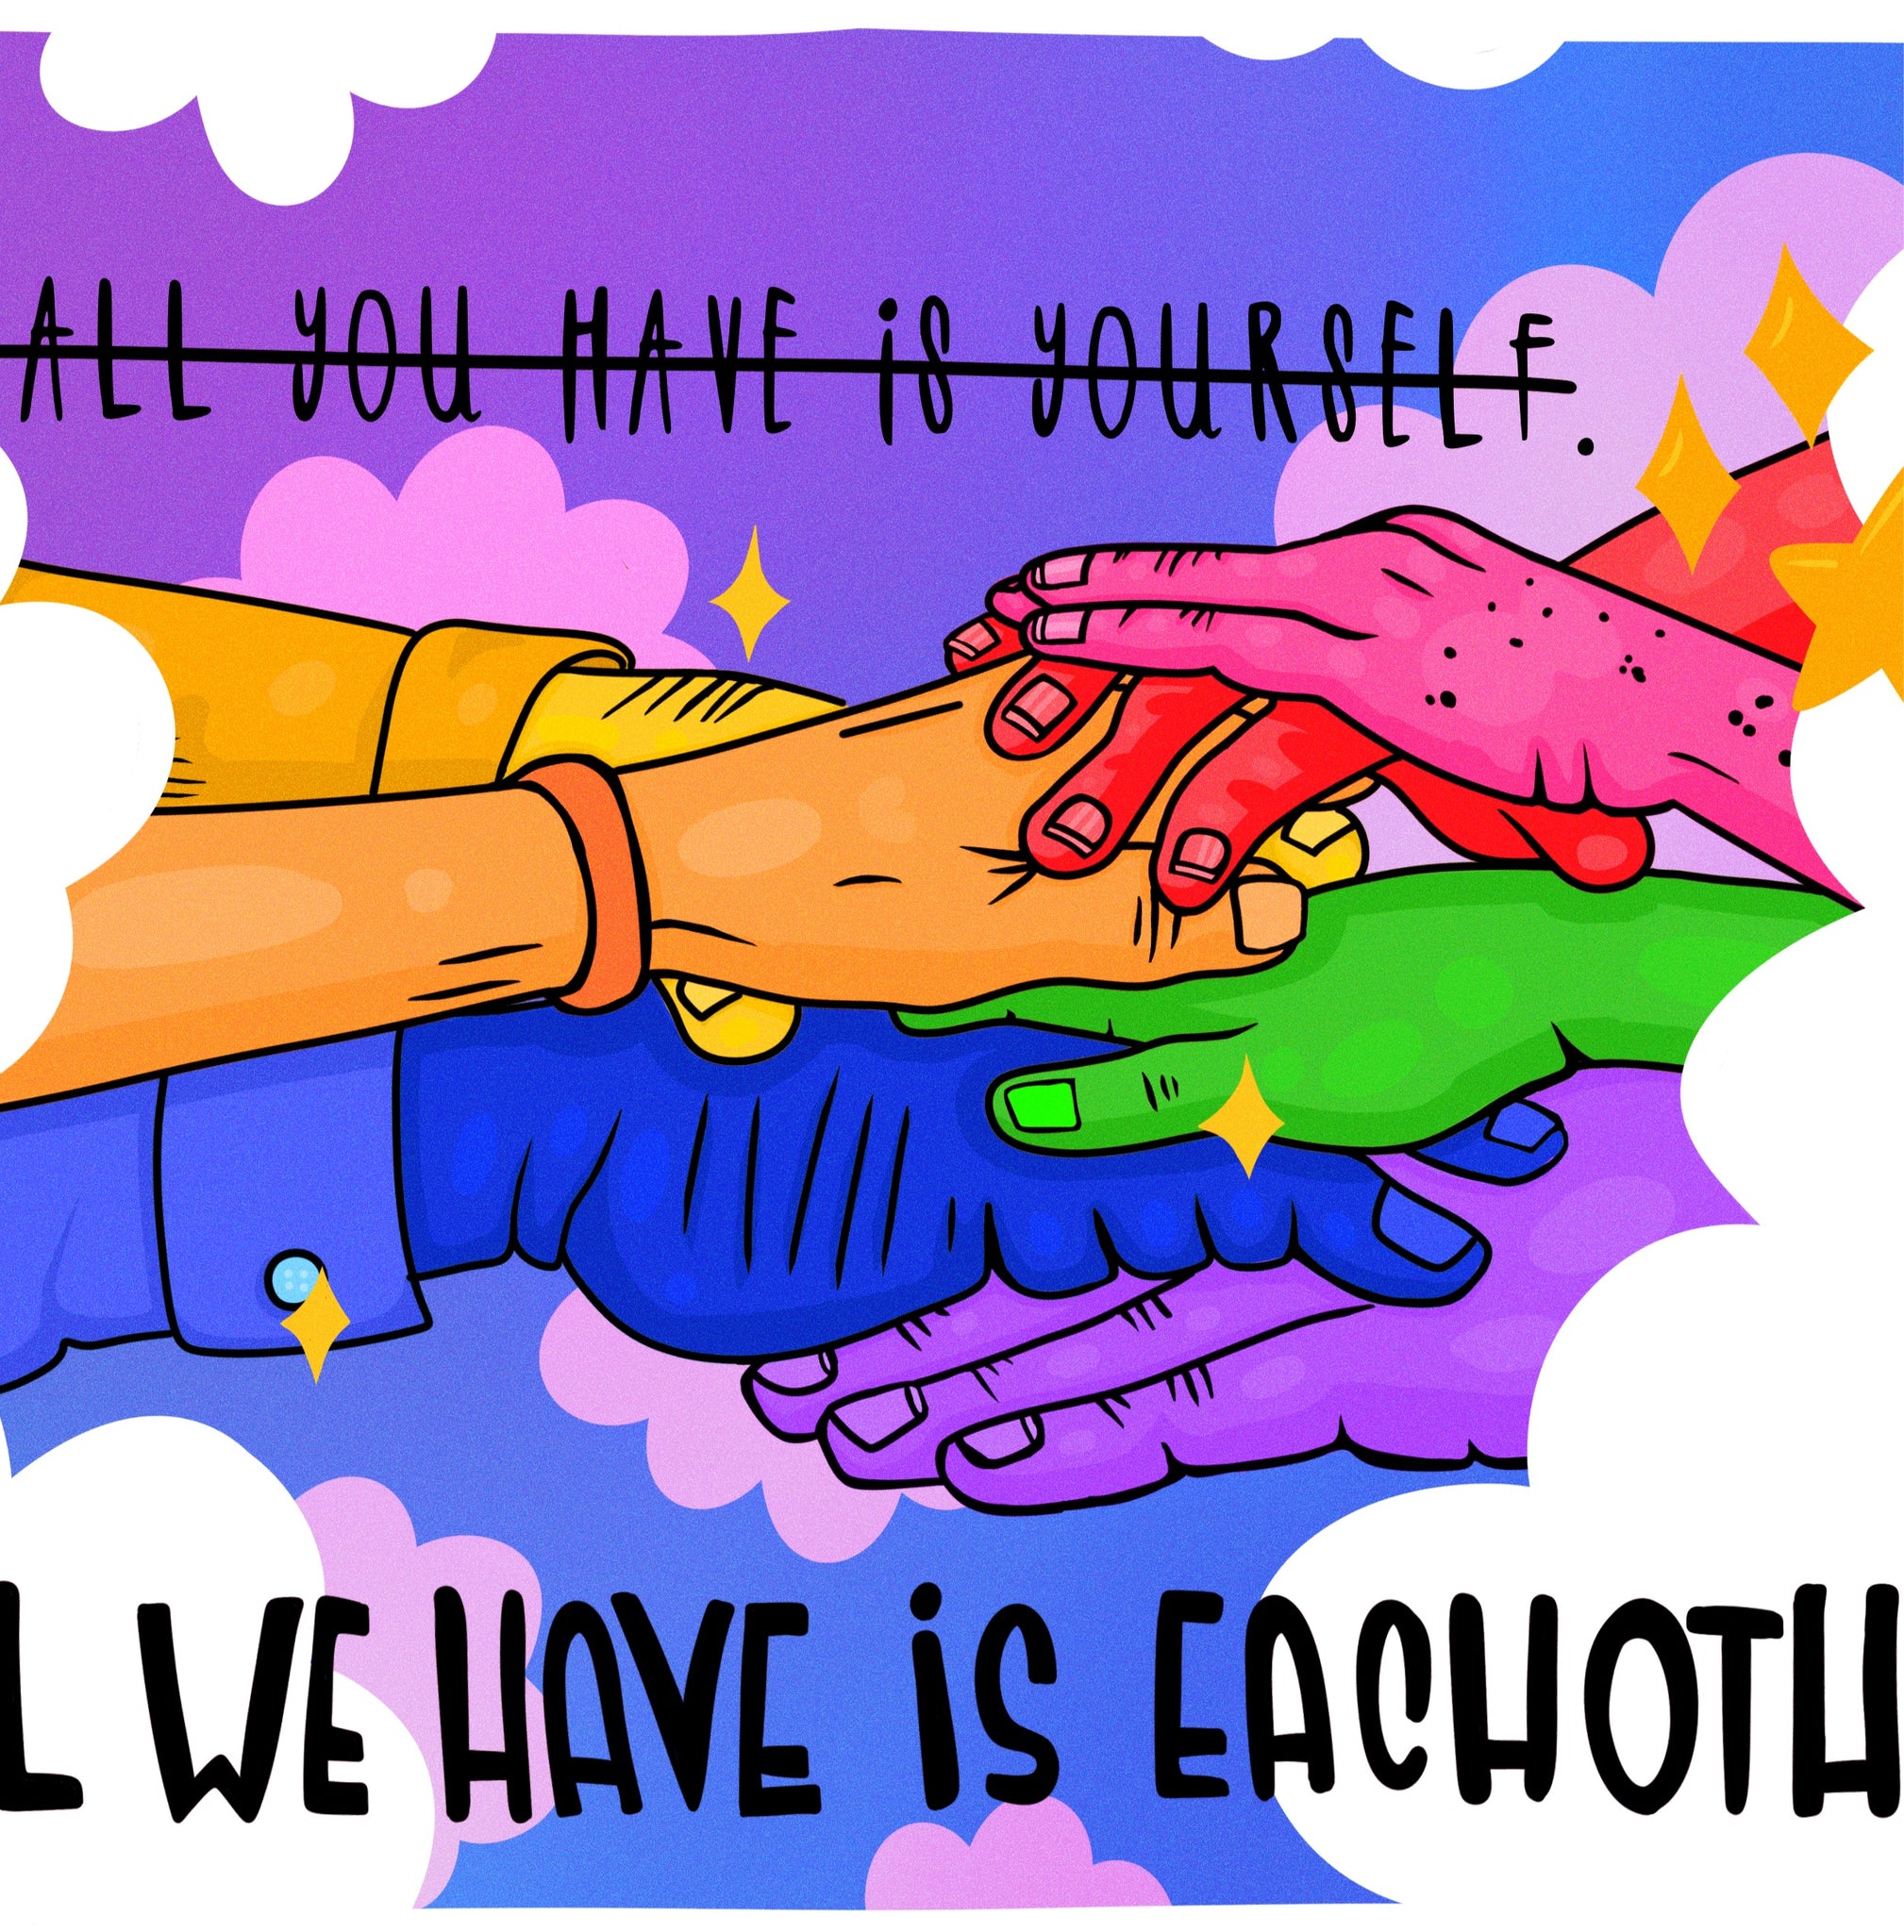 Yes Homo | All We Have Is Each Other Digital Illustration | Digital Print on Matte Photo Paper